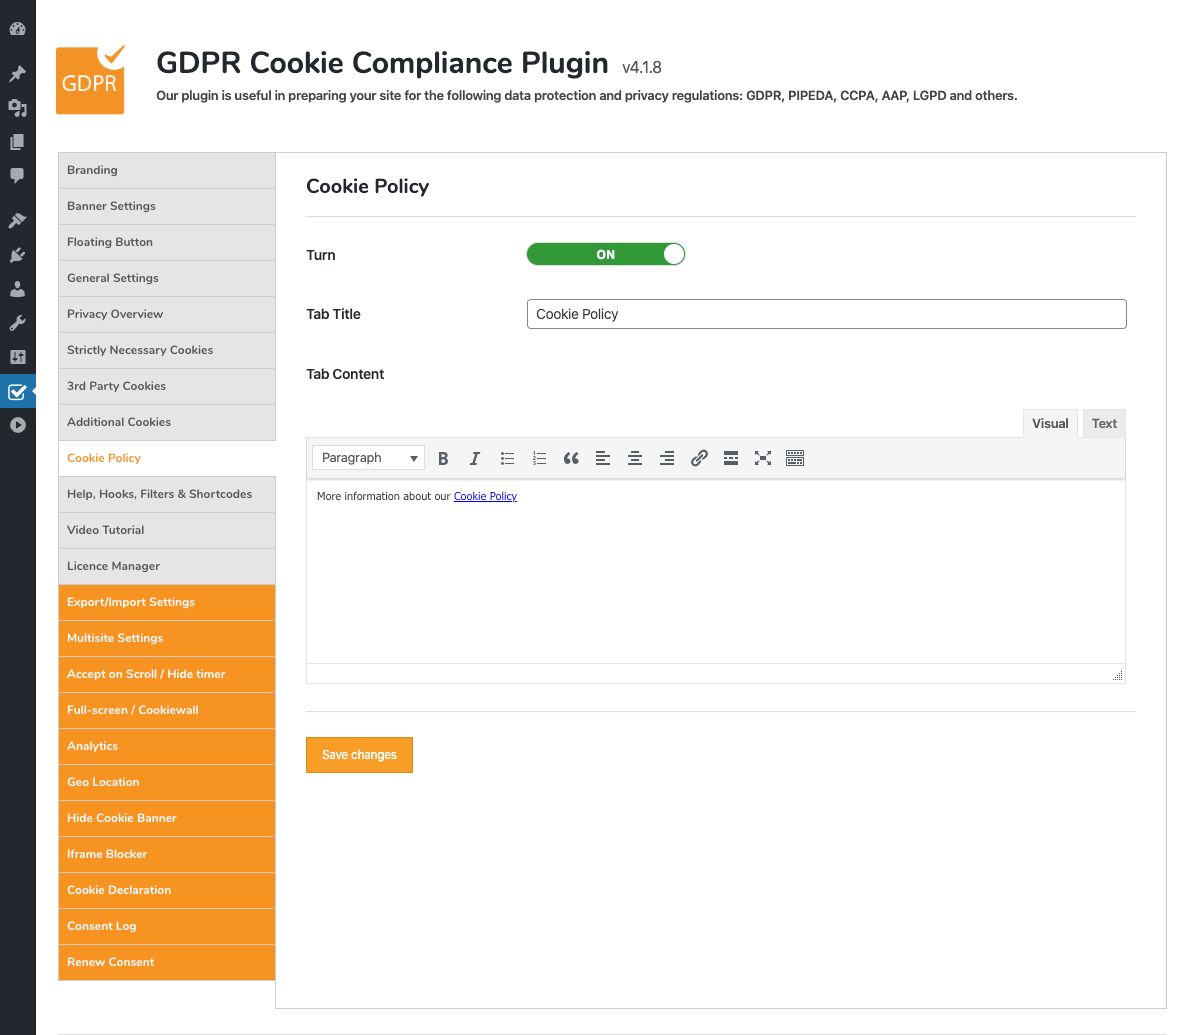 GDPR Cookie Compliance - Admin - Floating Button